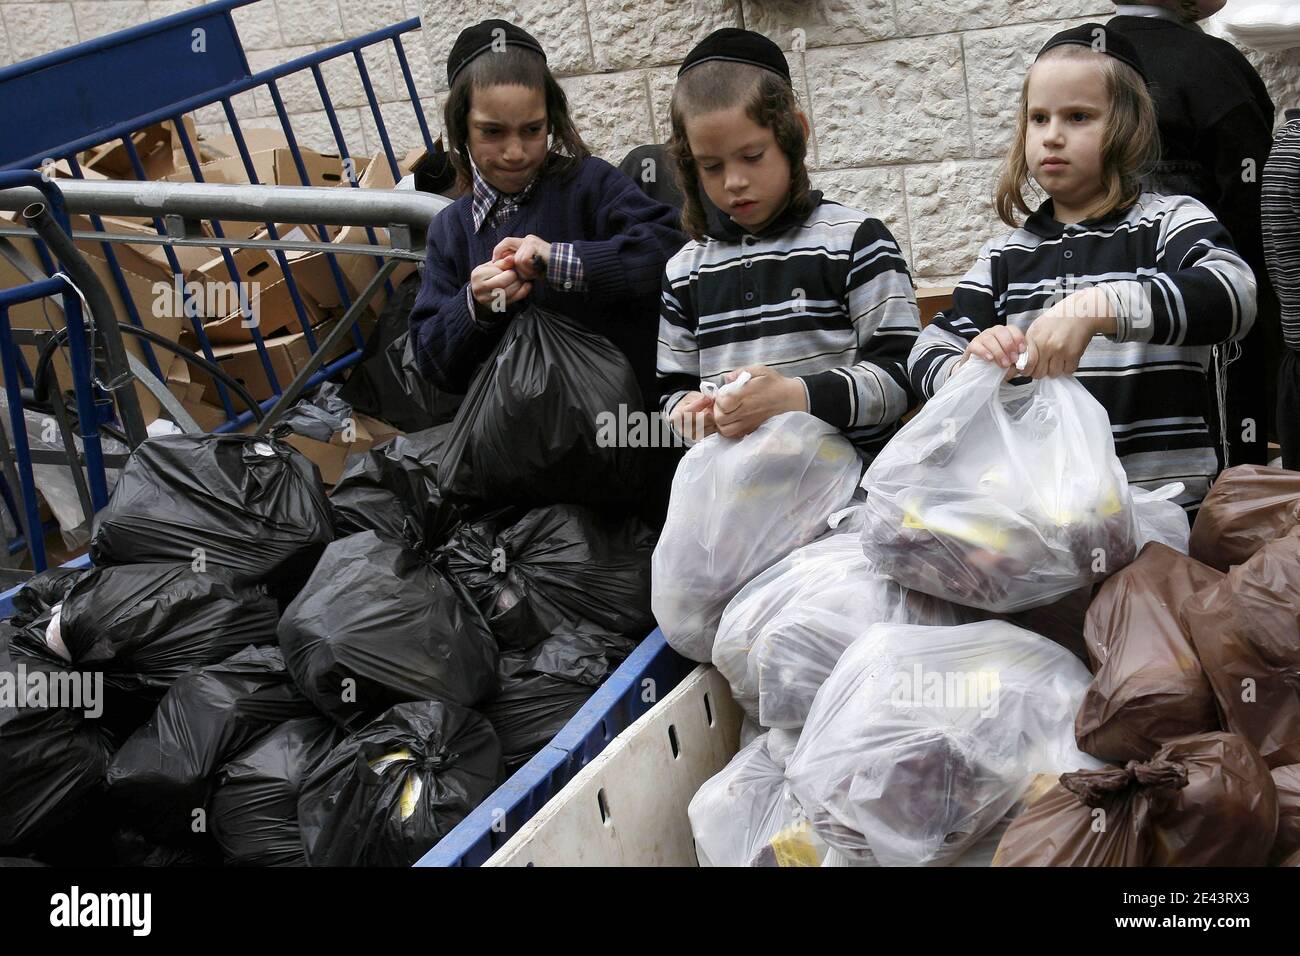 Ultra-Orthodox Jewish boys pack meat for distribution to the needy, for the upcoming Jewish holiday of Passover, in the Mea Shearim neighbourhood of Jerusalem, Israel on April 6, 2009. Passover commemorates the flight of Jews from Ancient Egypt as described in Exodus. According to the account, the Jews did not have time to prepare leavened bread before fleeing to the Promised Land. Photo by Olivier Fitoussi/ABACAPRESS.COM Stock Photo